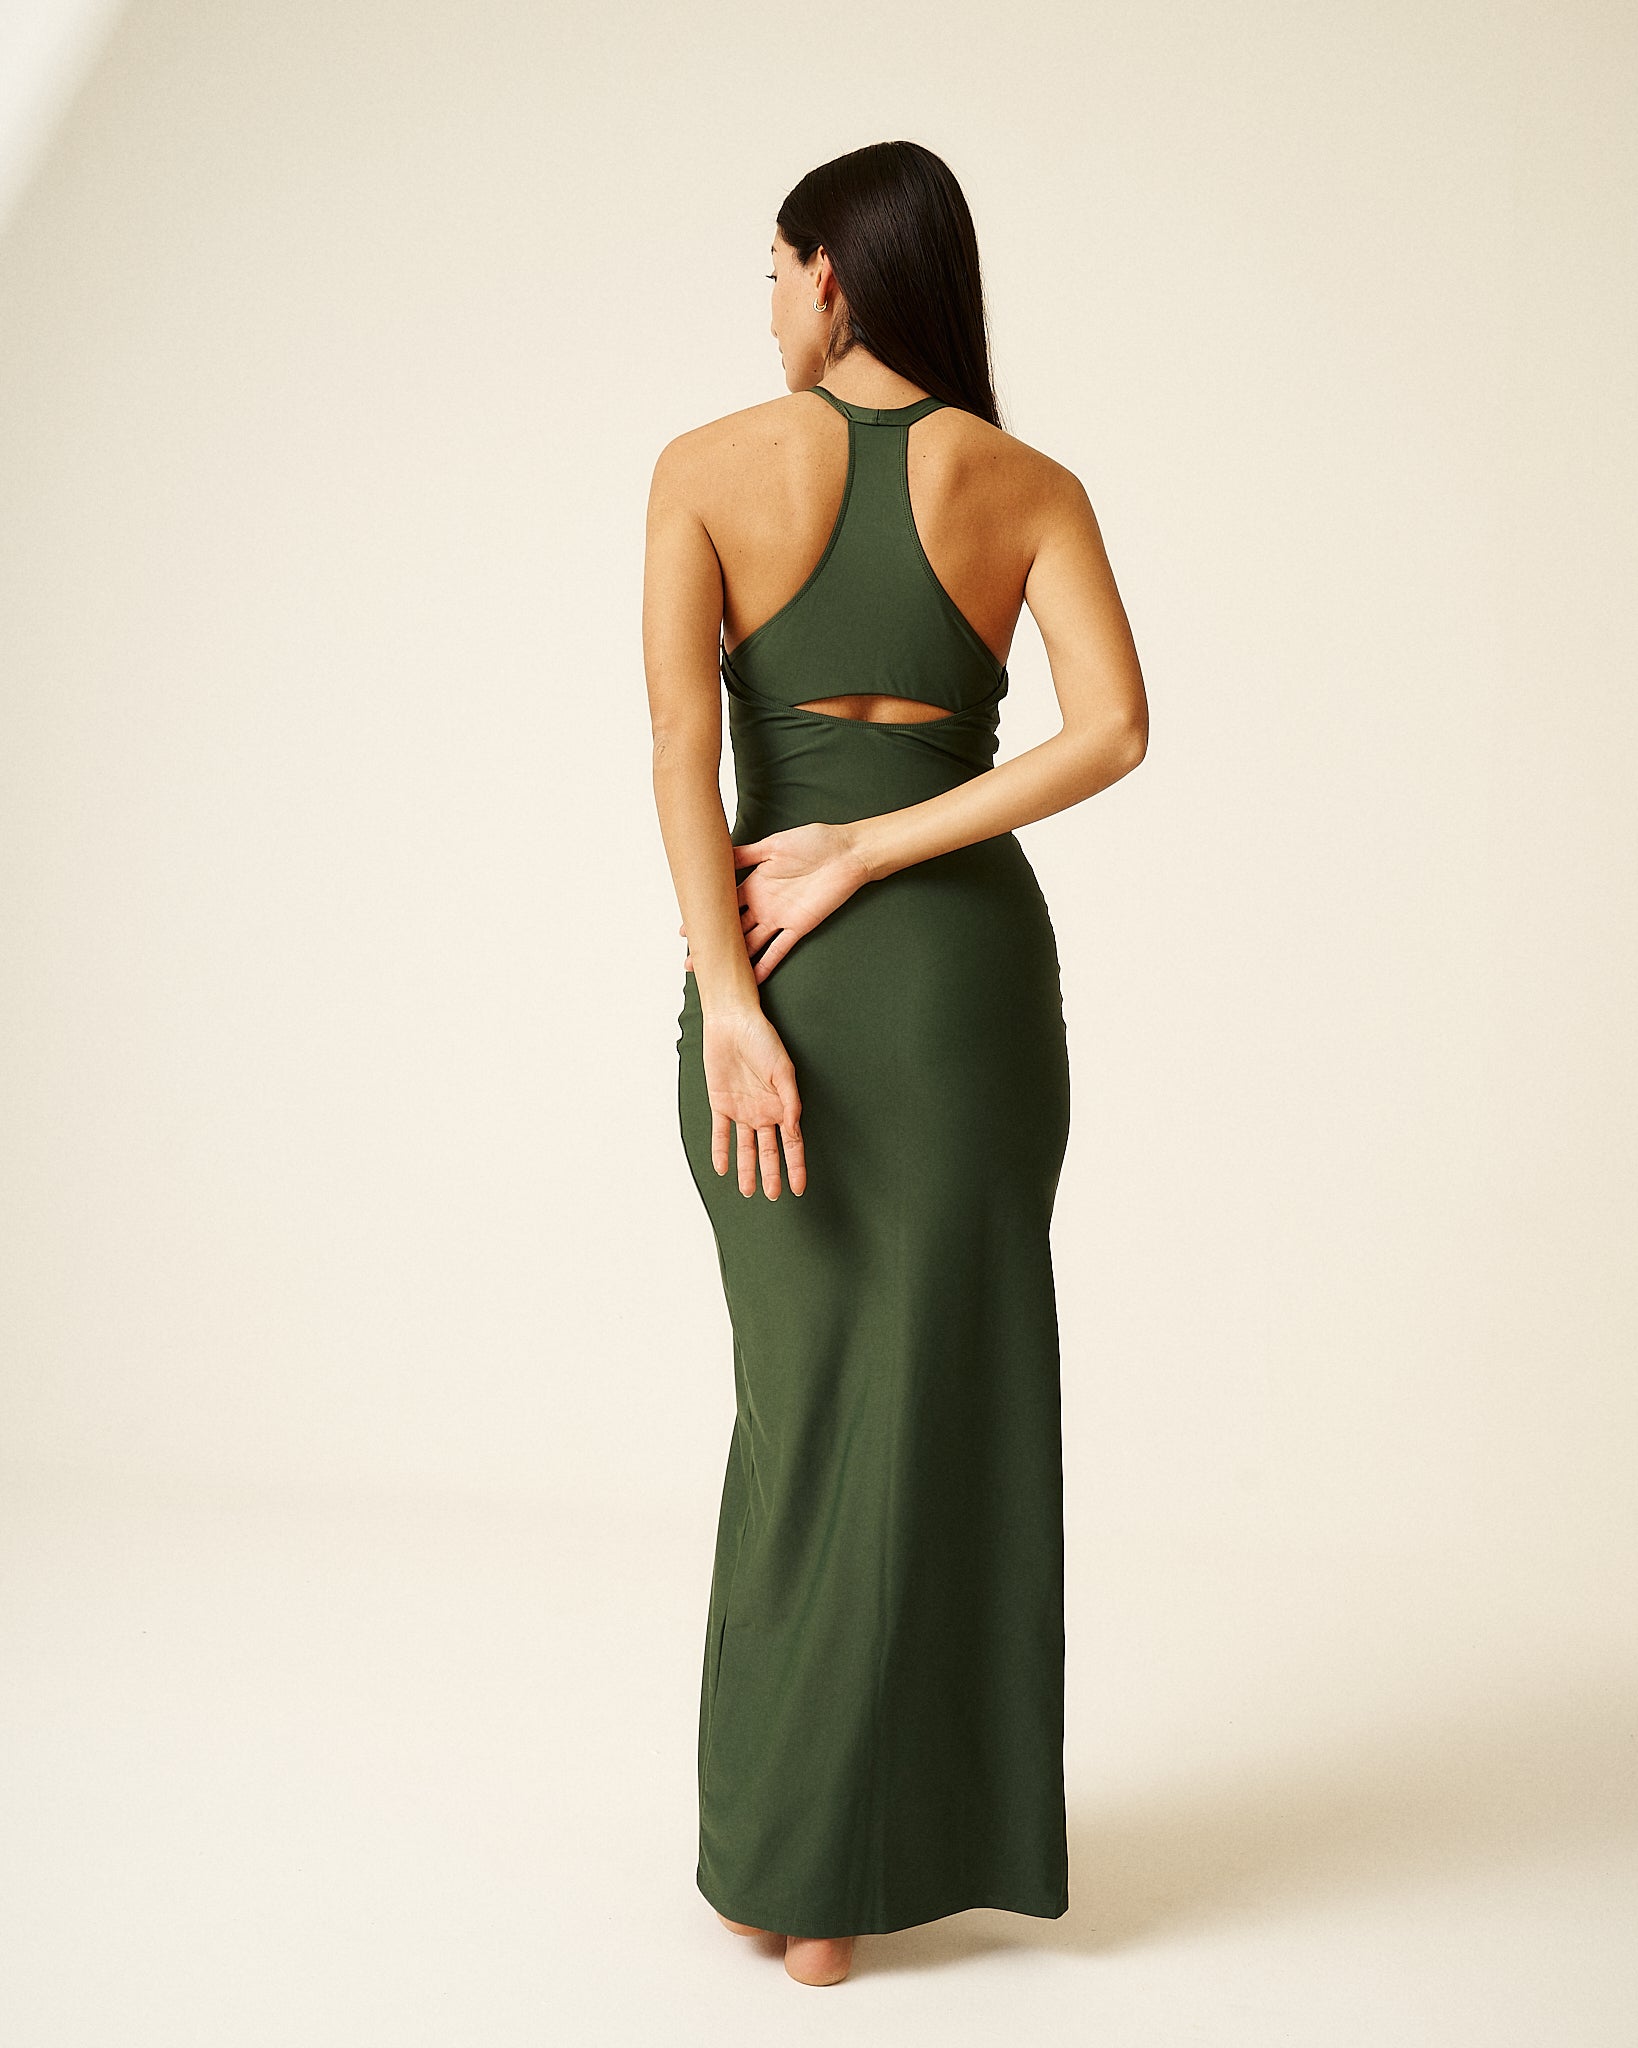 Discover Olivia, our exclusive sustainable luxury dress. Premium Econyl fiber offers elegance, comfort, and performance. Limited to 150 units, each certified and one-of-a-kind. Enjoy UPF50+ skin protection. Elevate fashion with purpose and indulge in our exquisite limited edition dresses. Green